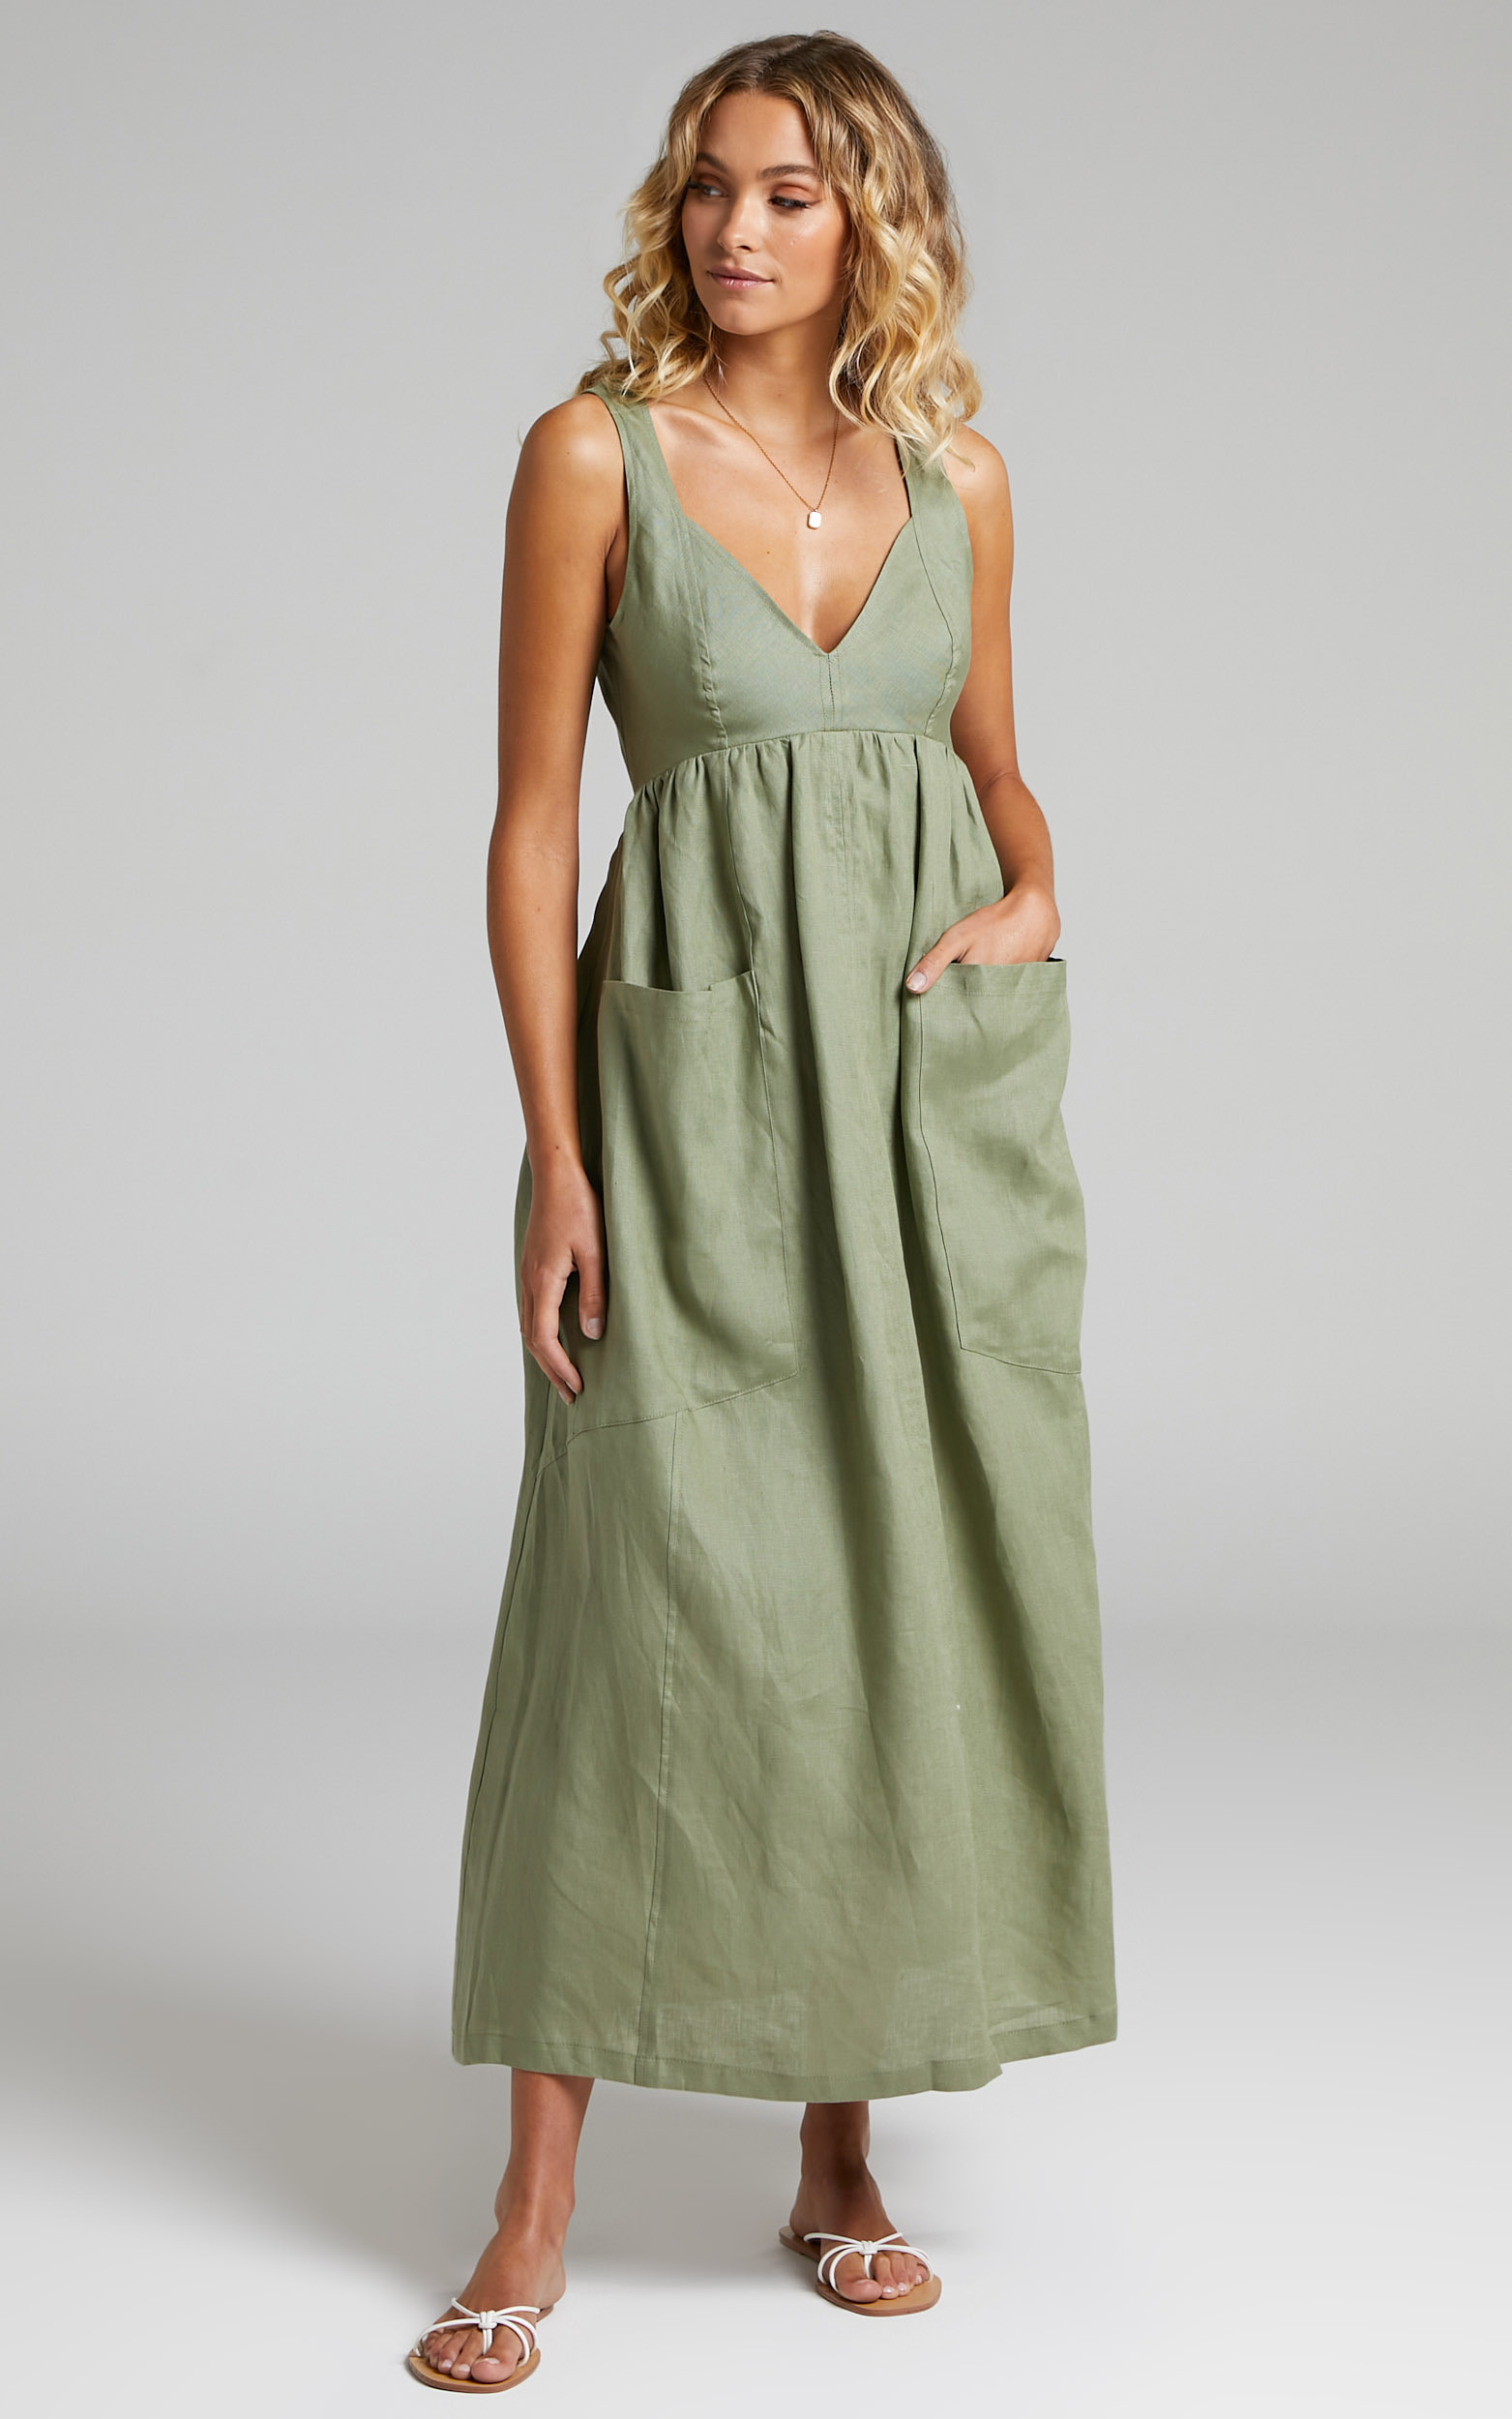 Amalie The Label - Edlynne Linen Topstitched Open Back Midi Dress in Khaki - 06, GRN1, hi-res image number null